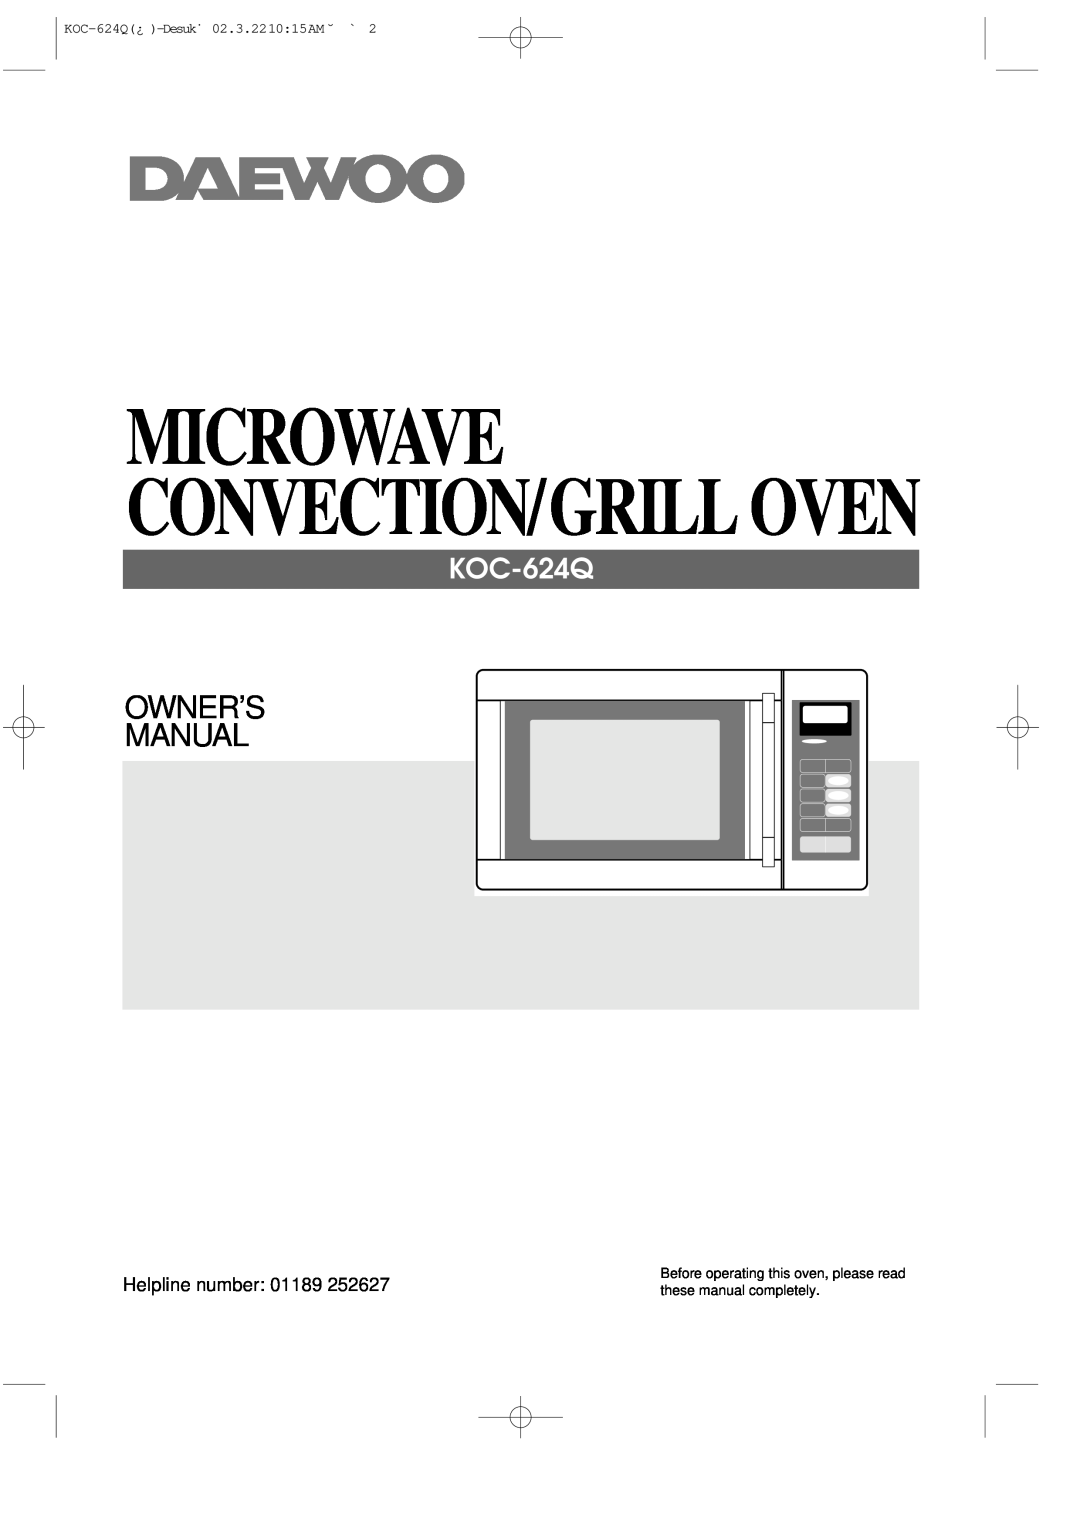 Daewoo owner manual Microwave Convection/Grill Oven, KOC-624Q¿ -Desuk˙ 02.3.221015AM ˘ ` 